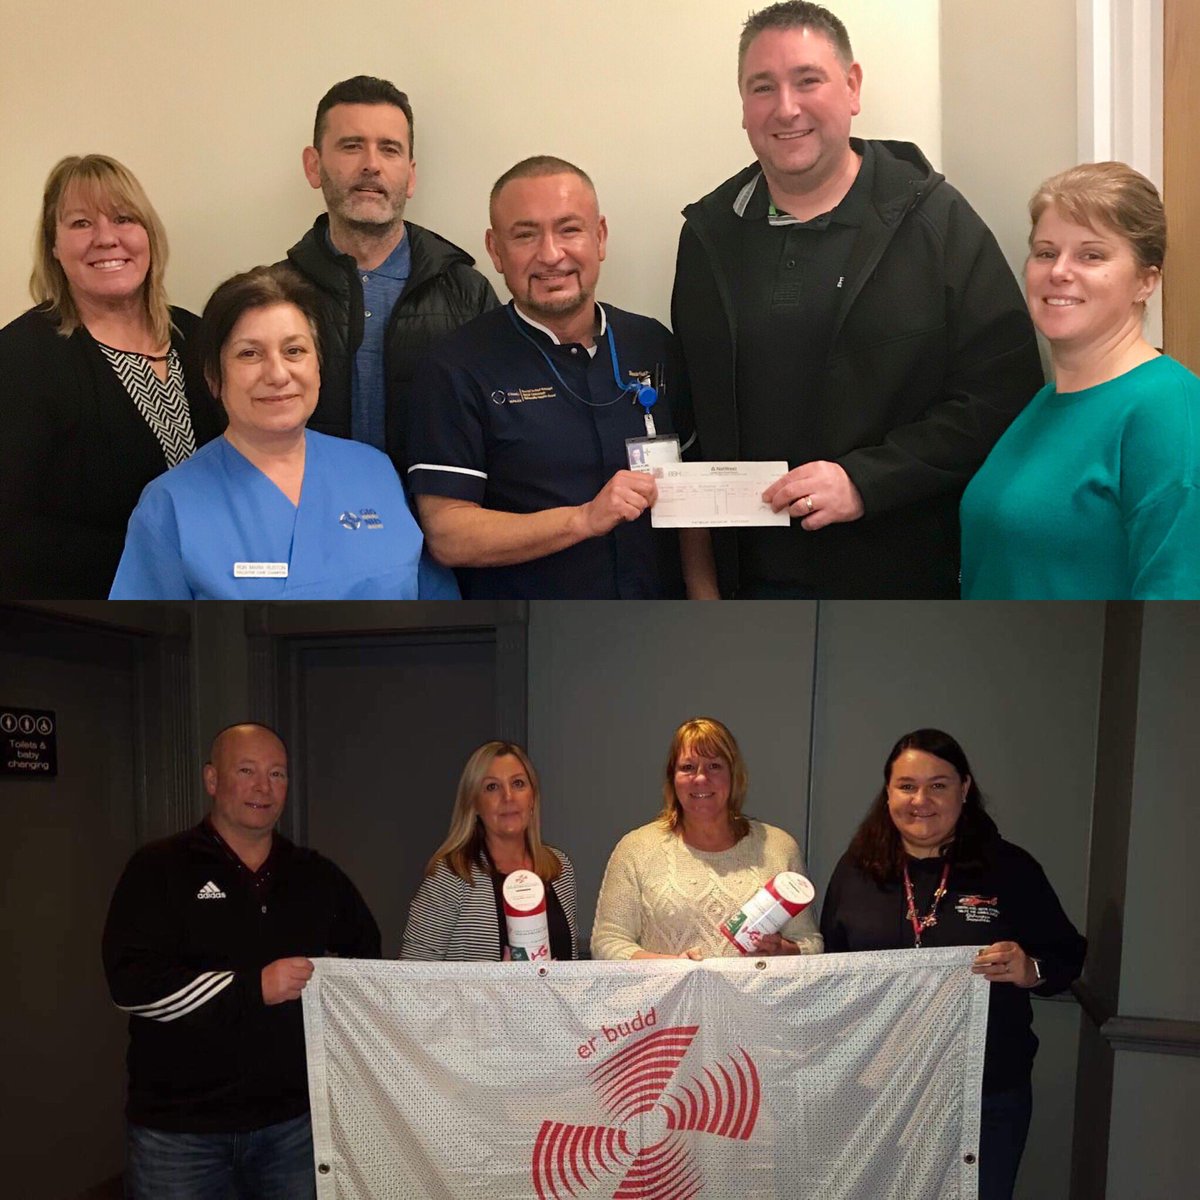 Super proud to hand over £5190 to @air_ambulance and @awyrlascharity Deeside Hospital ward - now to start planning this years #CharityDo and selecting a #localcharity  -thanks to all involved @aura_wales @GCS_Title @Paliltd @sasdanielsLLP #CeilingsDirect #Samsonite